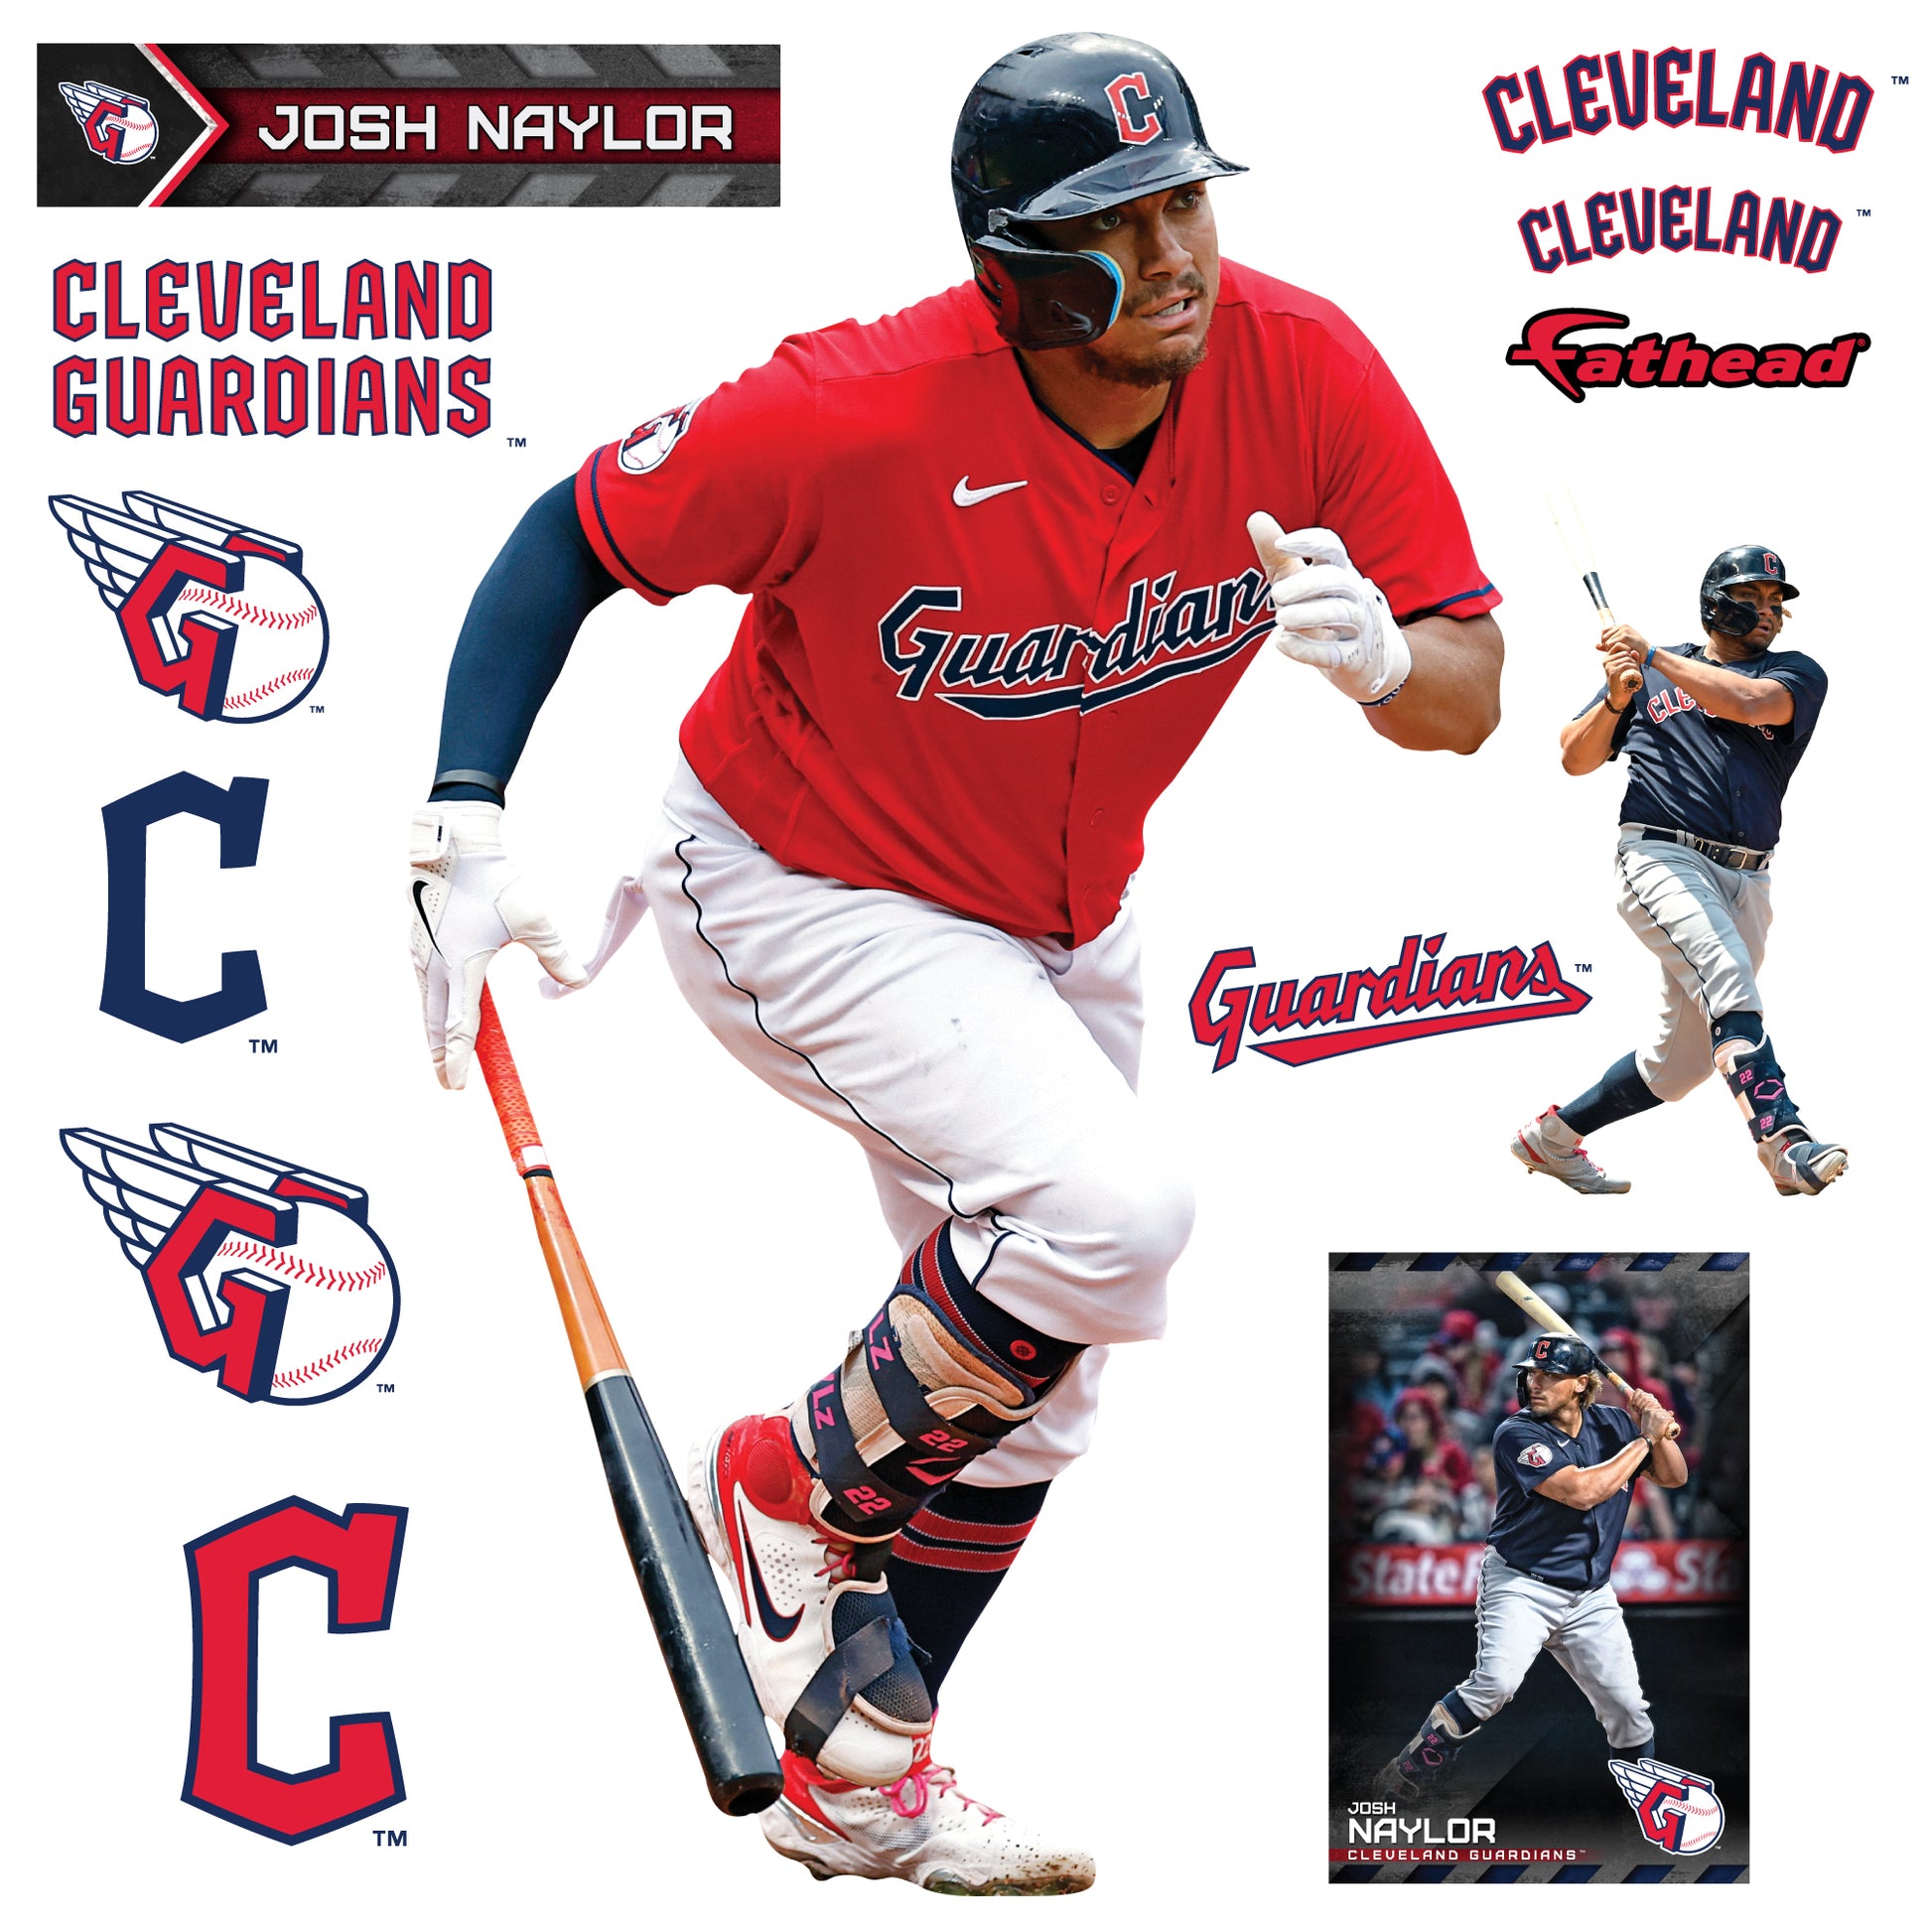 Cleveland Guardians: Josh Naylor 2022 - Officially Licensed MLB